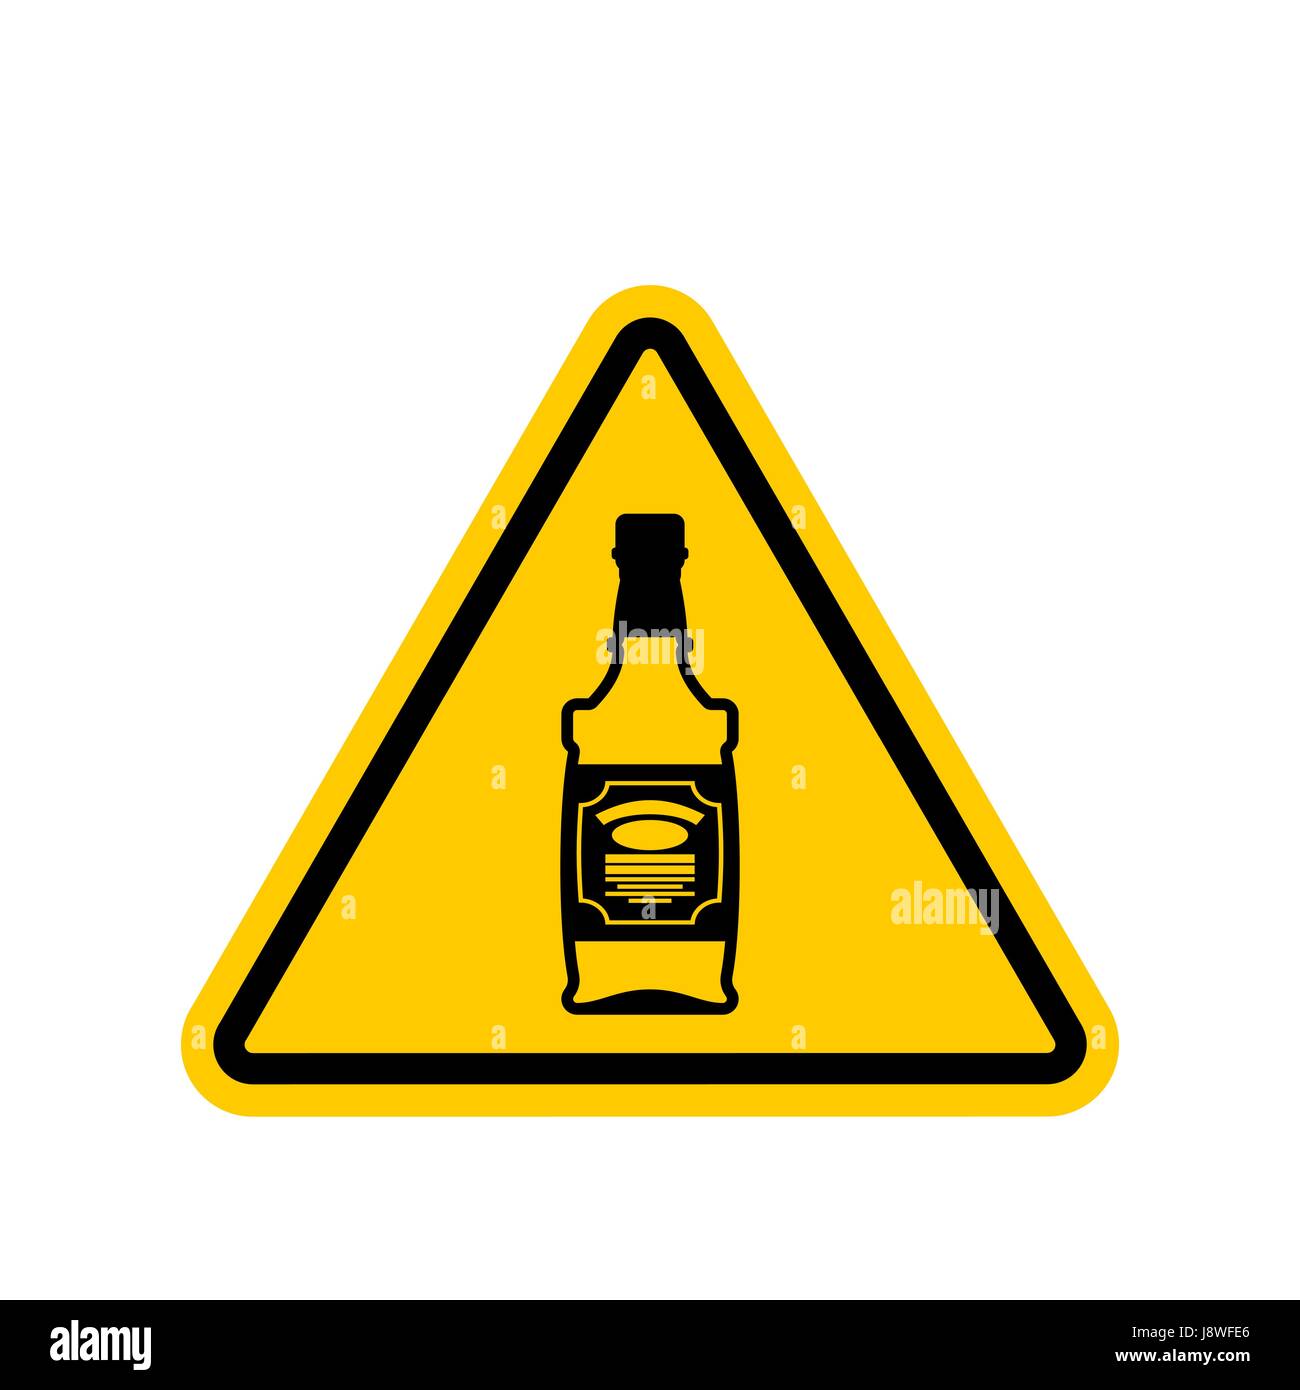 Attention alcohol. Bottle of whiskey on yellow triangle. Road sign Caution alcoholic Stock Vector